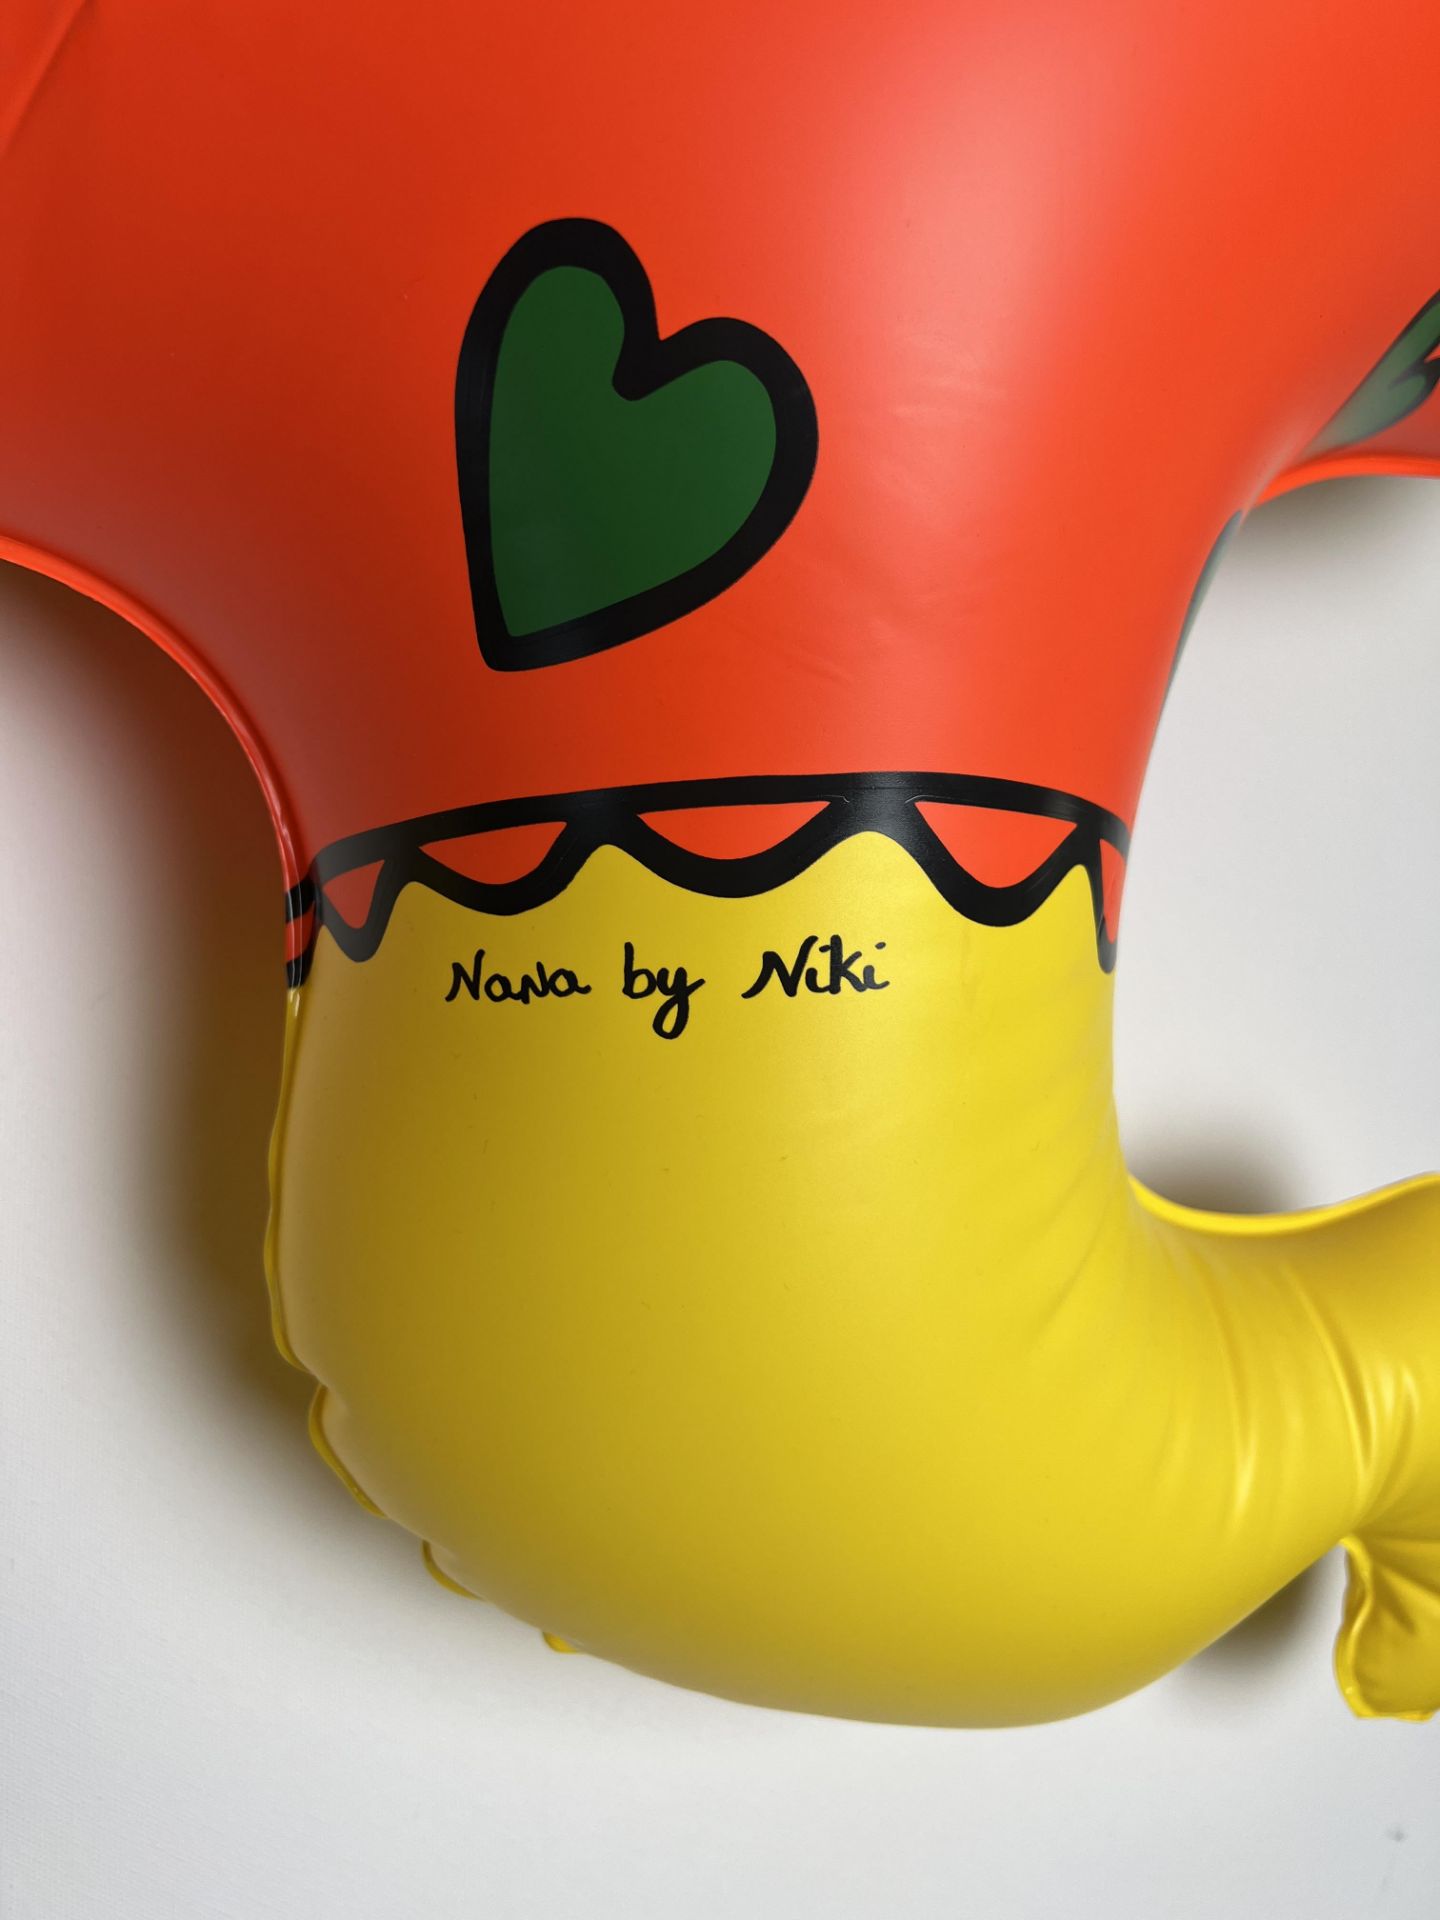 Niki De Saint Phalle. Yellow chick. Inflatable plastic sculpture. Signed "Nana by Niki" in the plate - Image 3 of 5